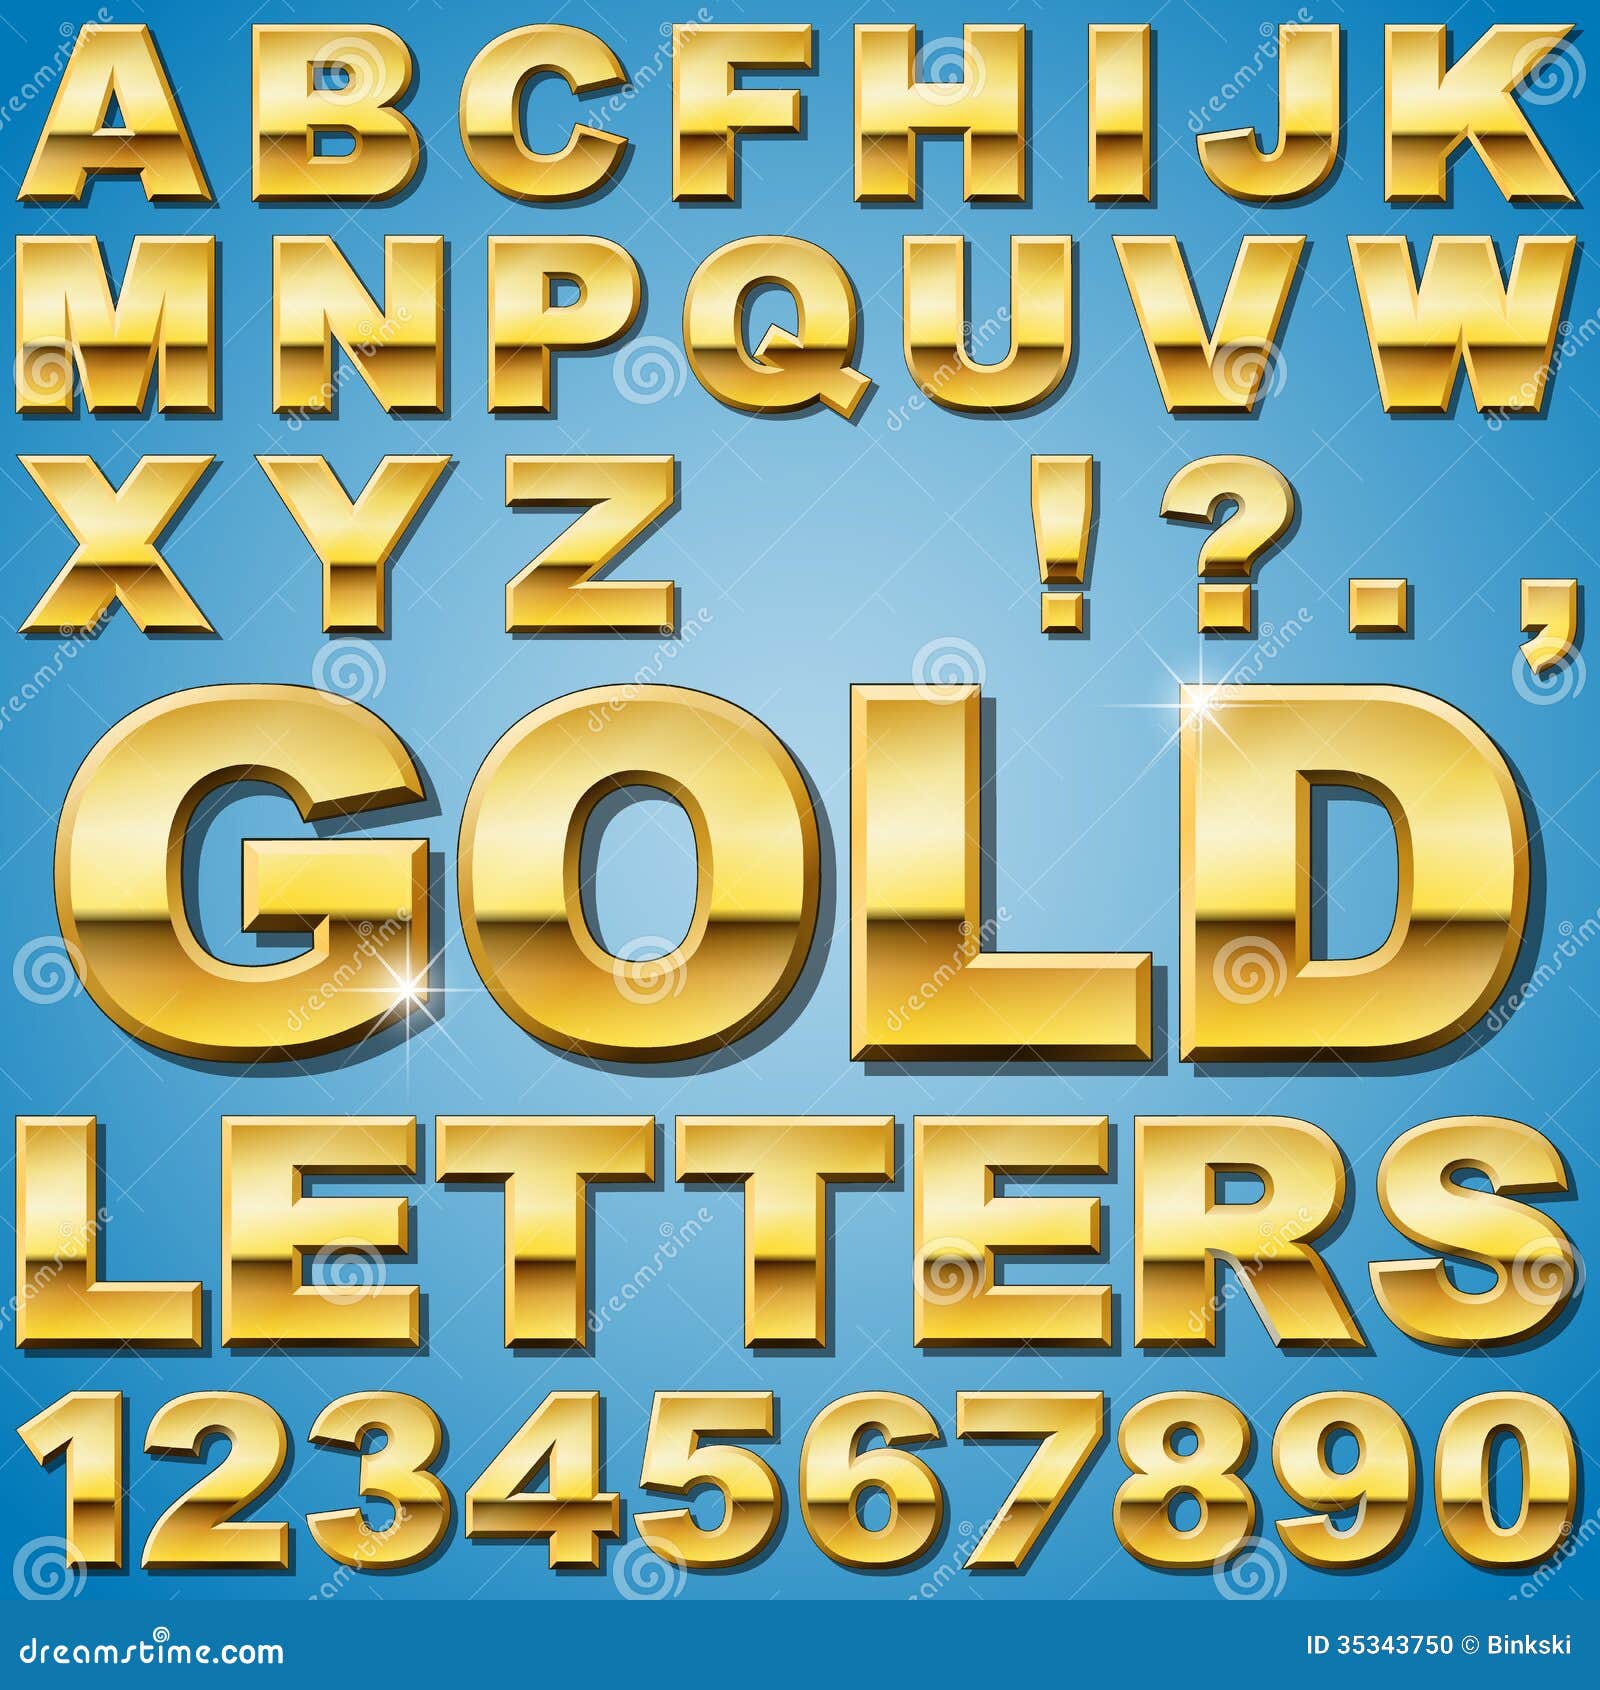 Gold Letters stock vector. Illustration of shiny, metallic - 35343750